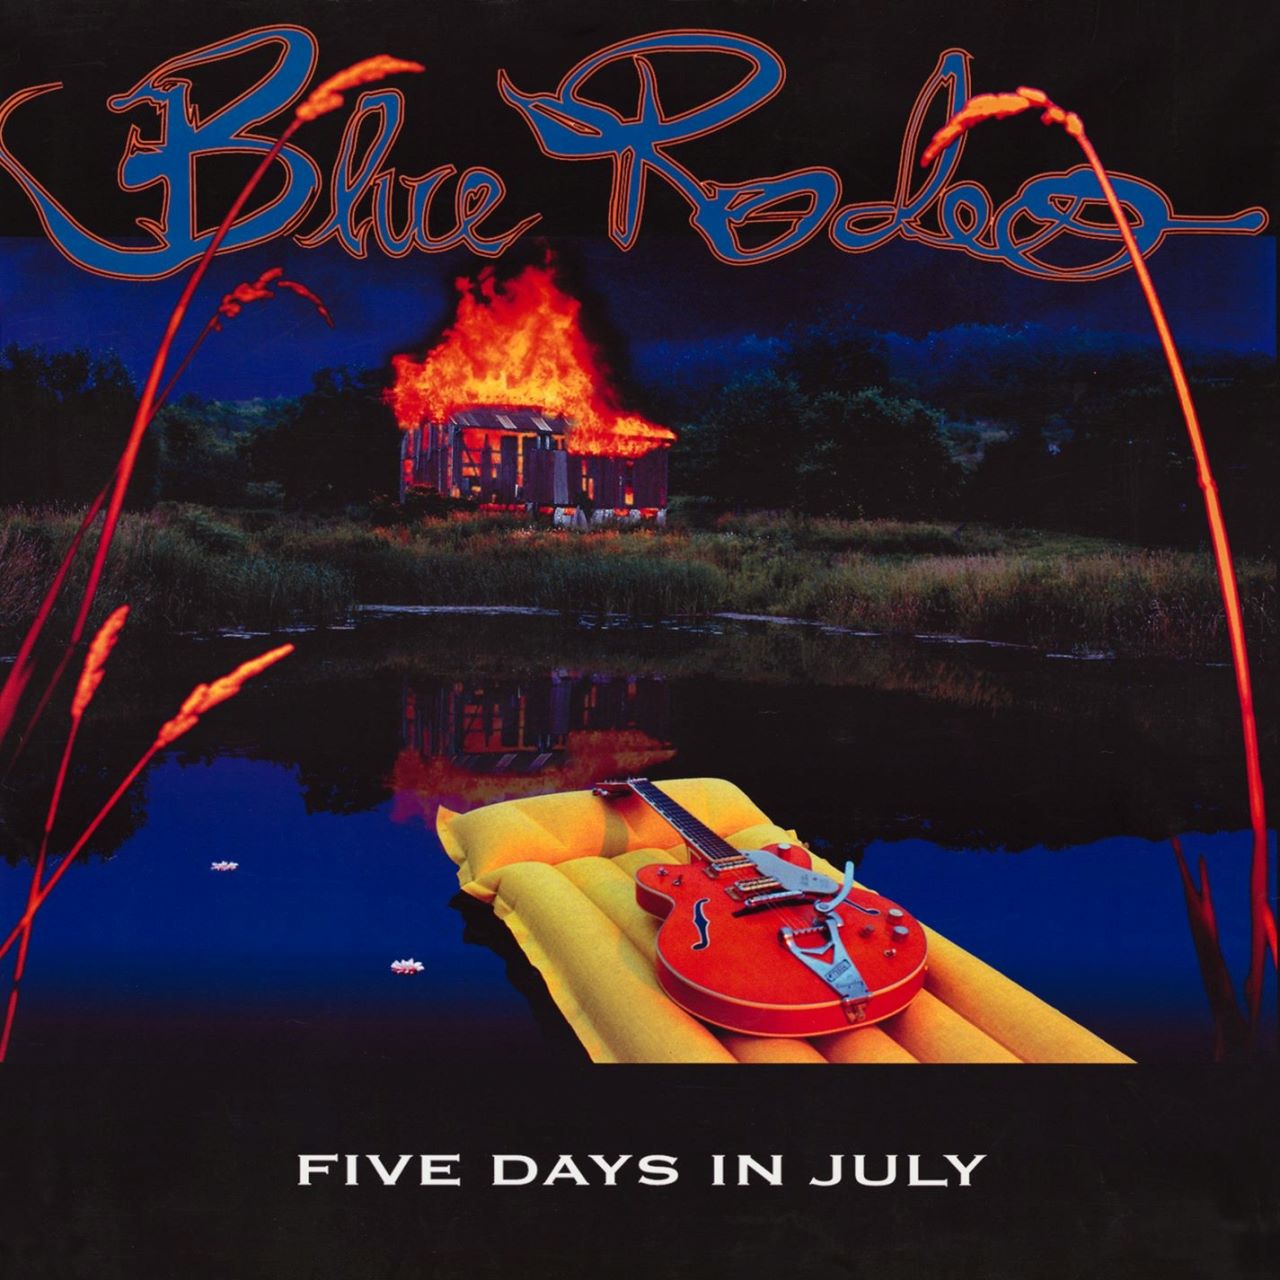 Blue Rodeo - Five Days In July cover album